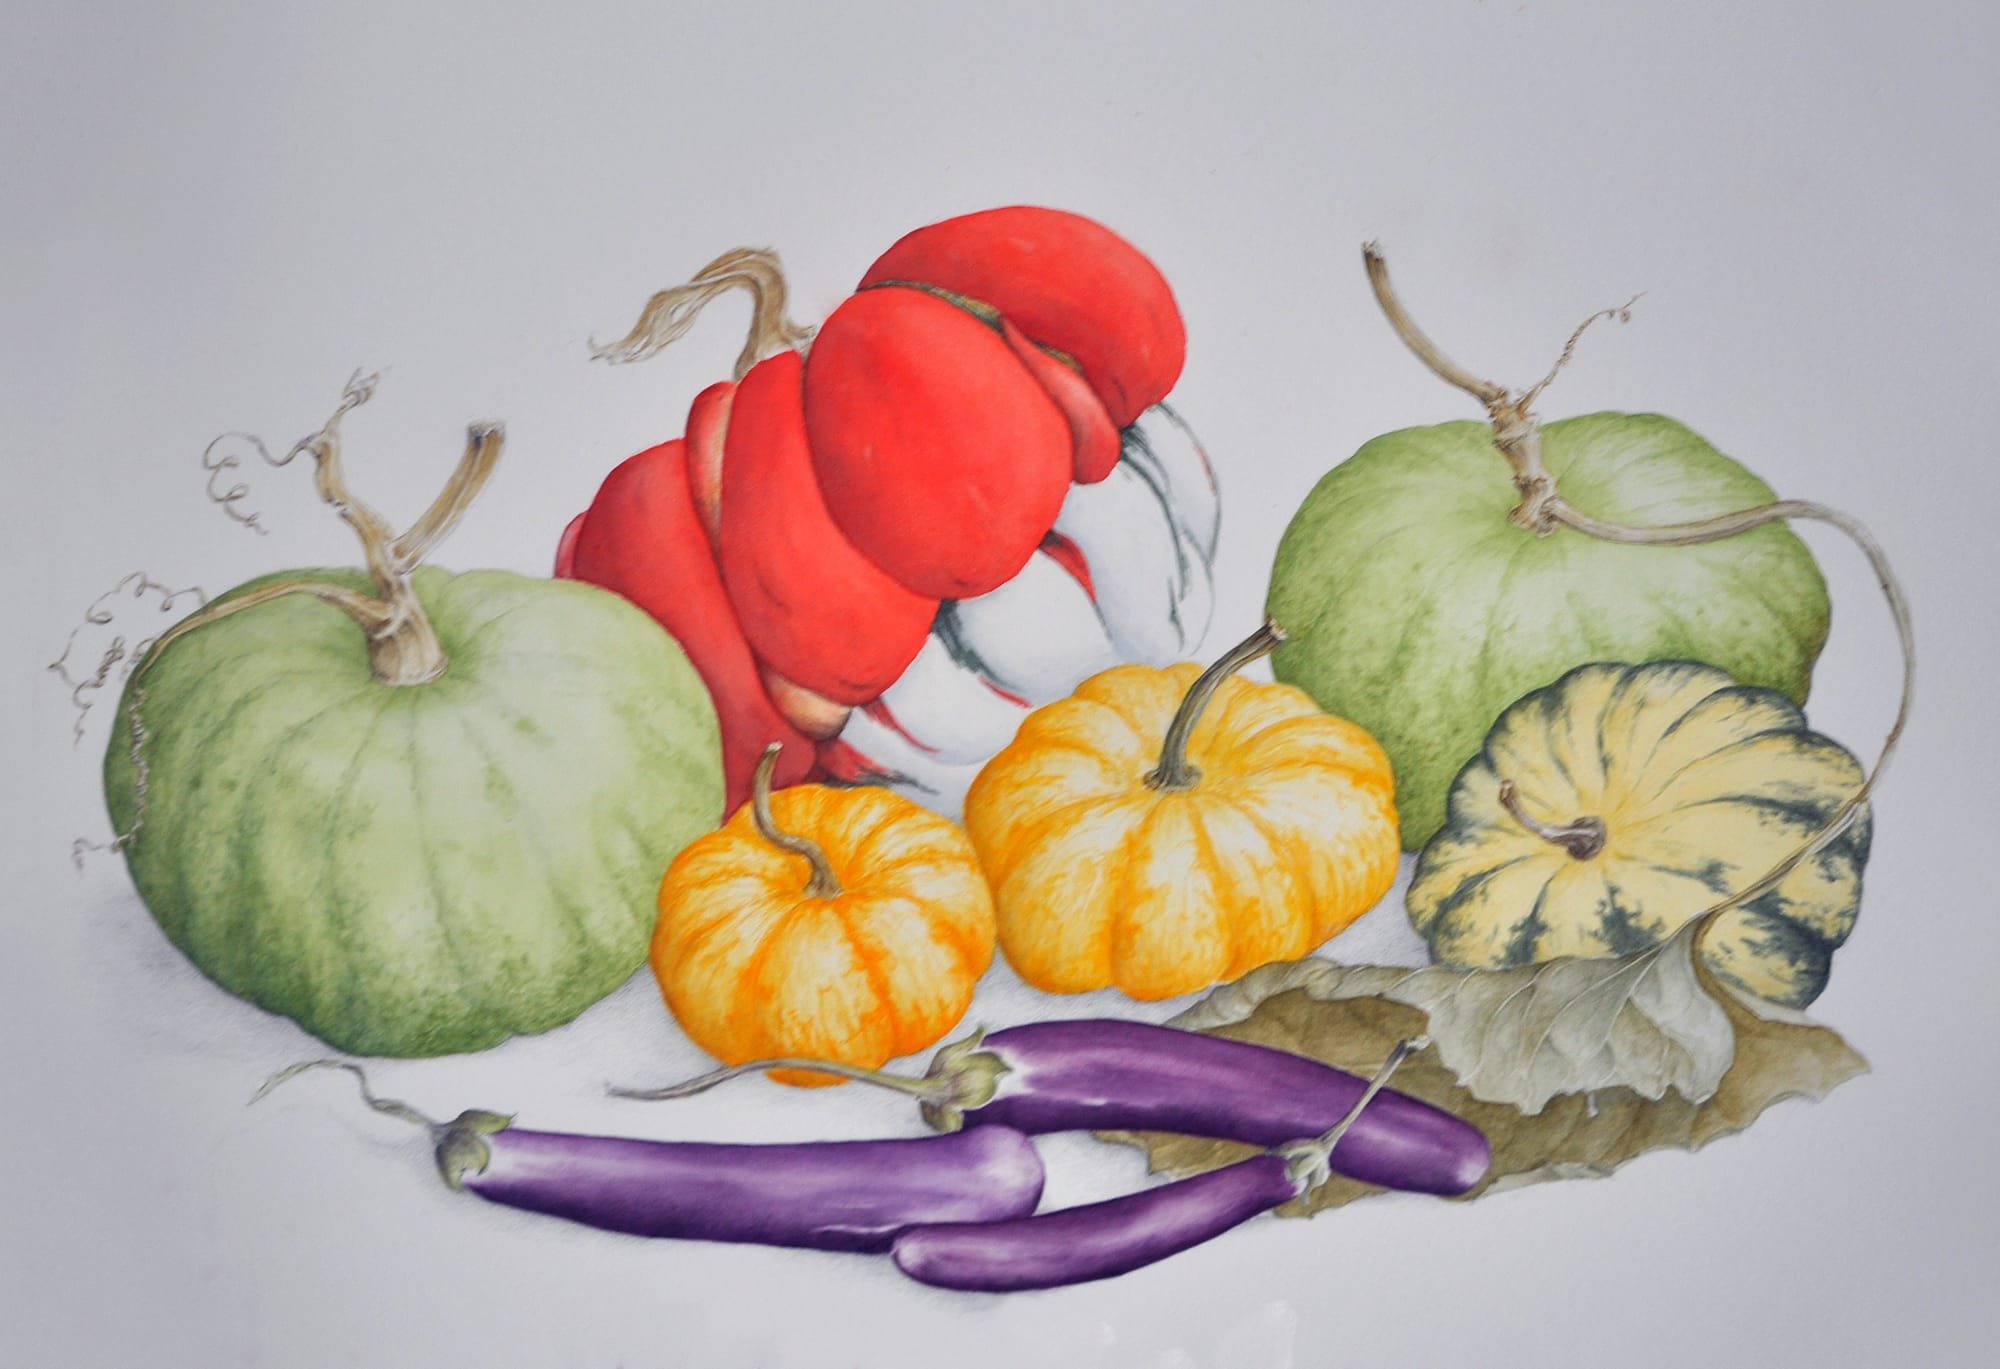 Squashes and gourds